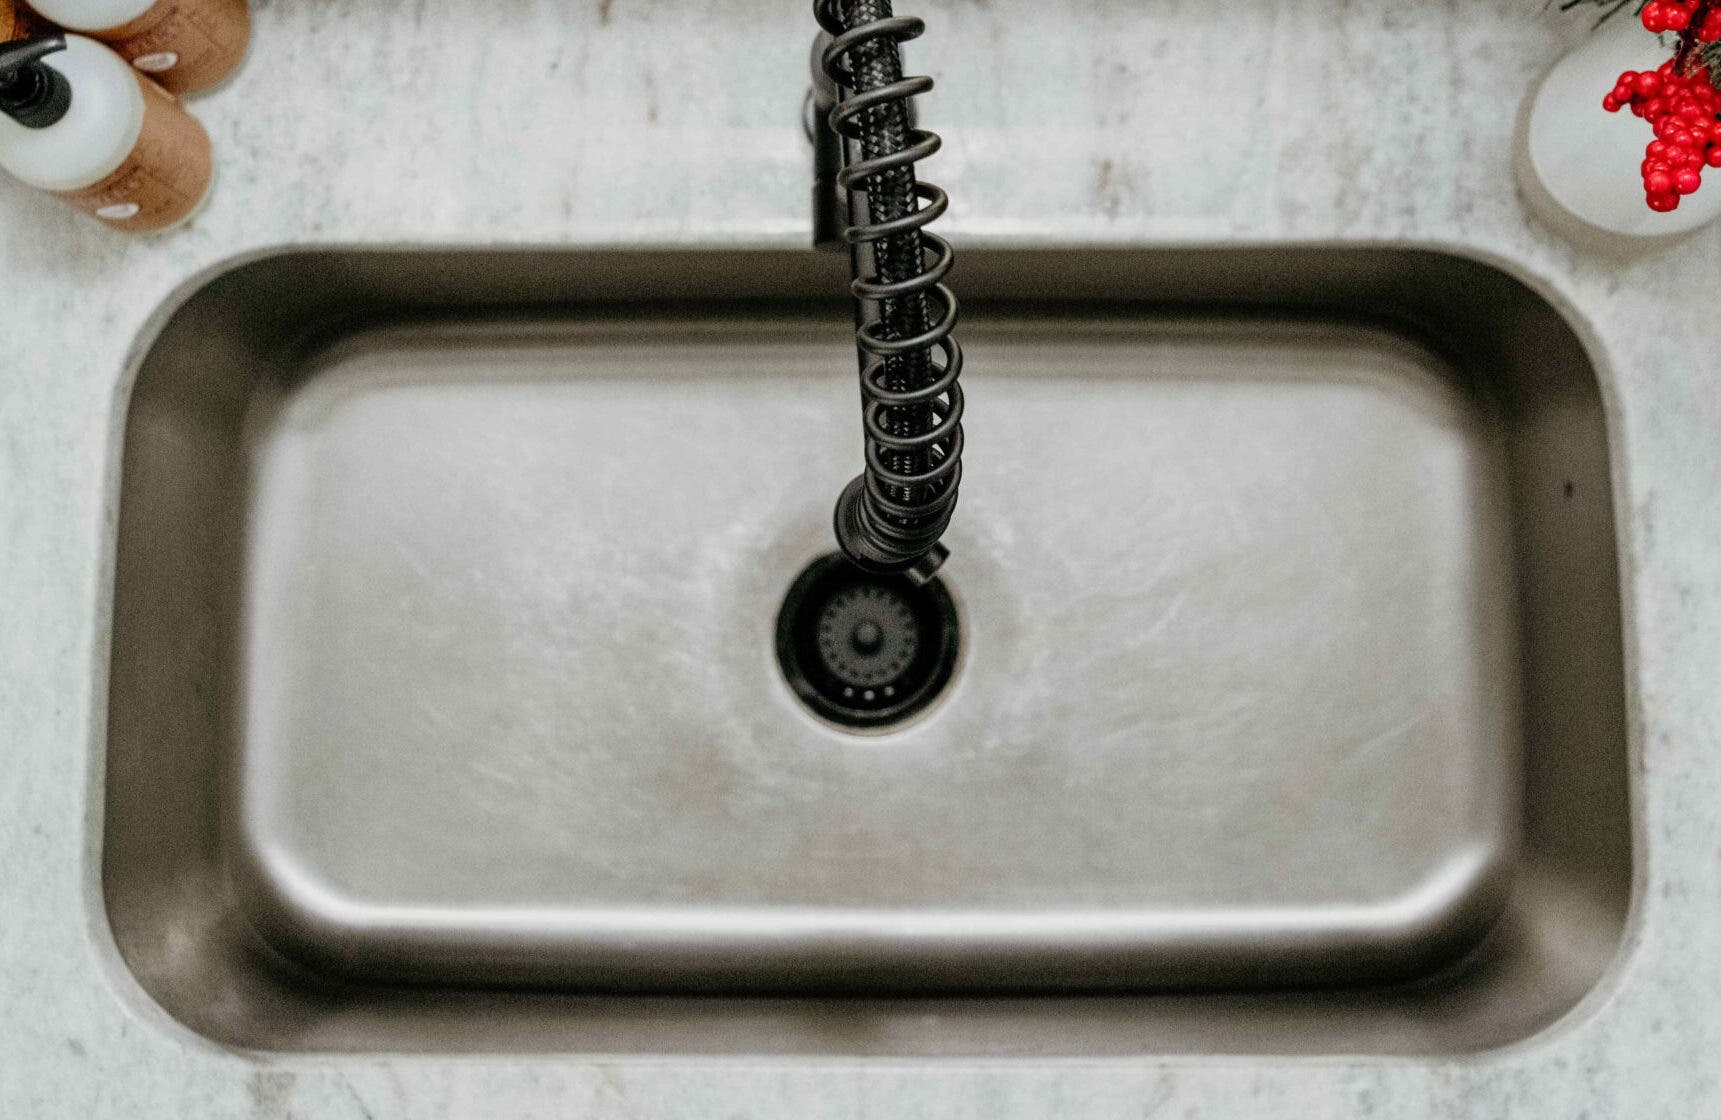 How to Upgrade While Replacing Sink Drains